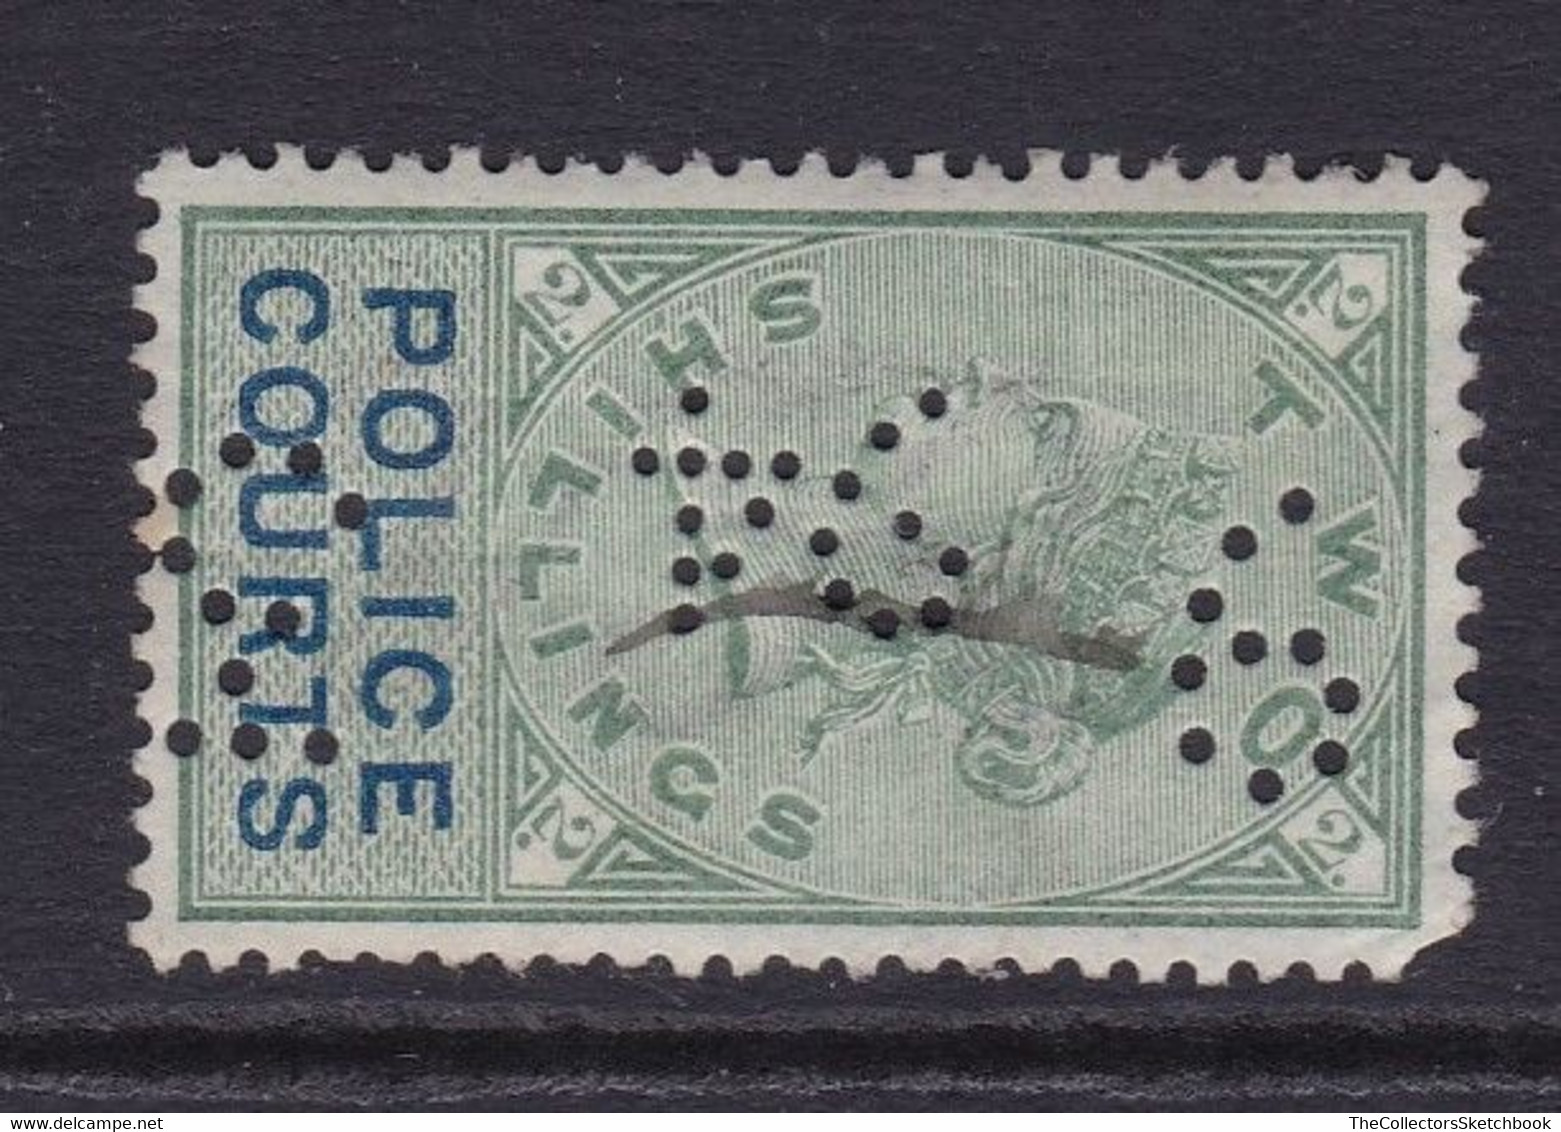 GB Fiscal/ Revenue Stamp. Police Courts 1/- Green &black Used. Barefoot 10 - Revenue Stamps